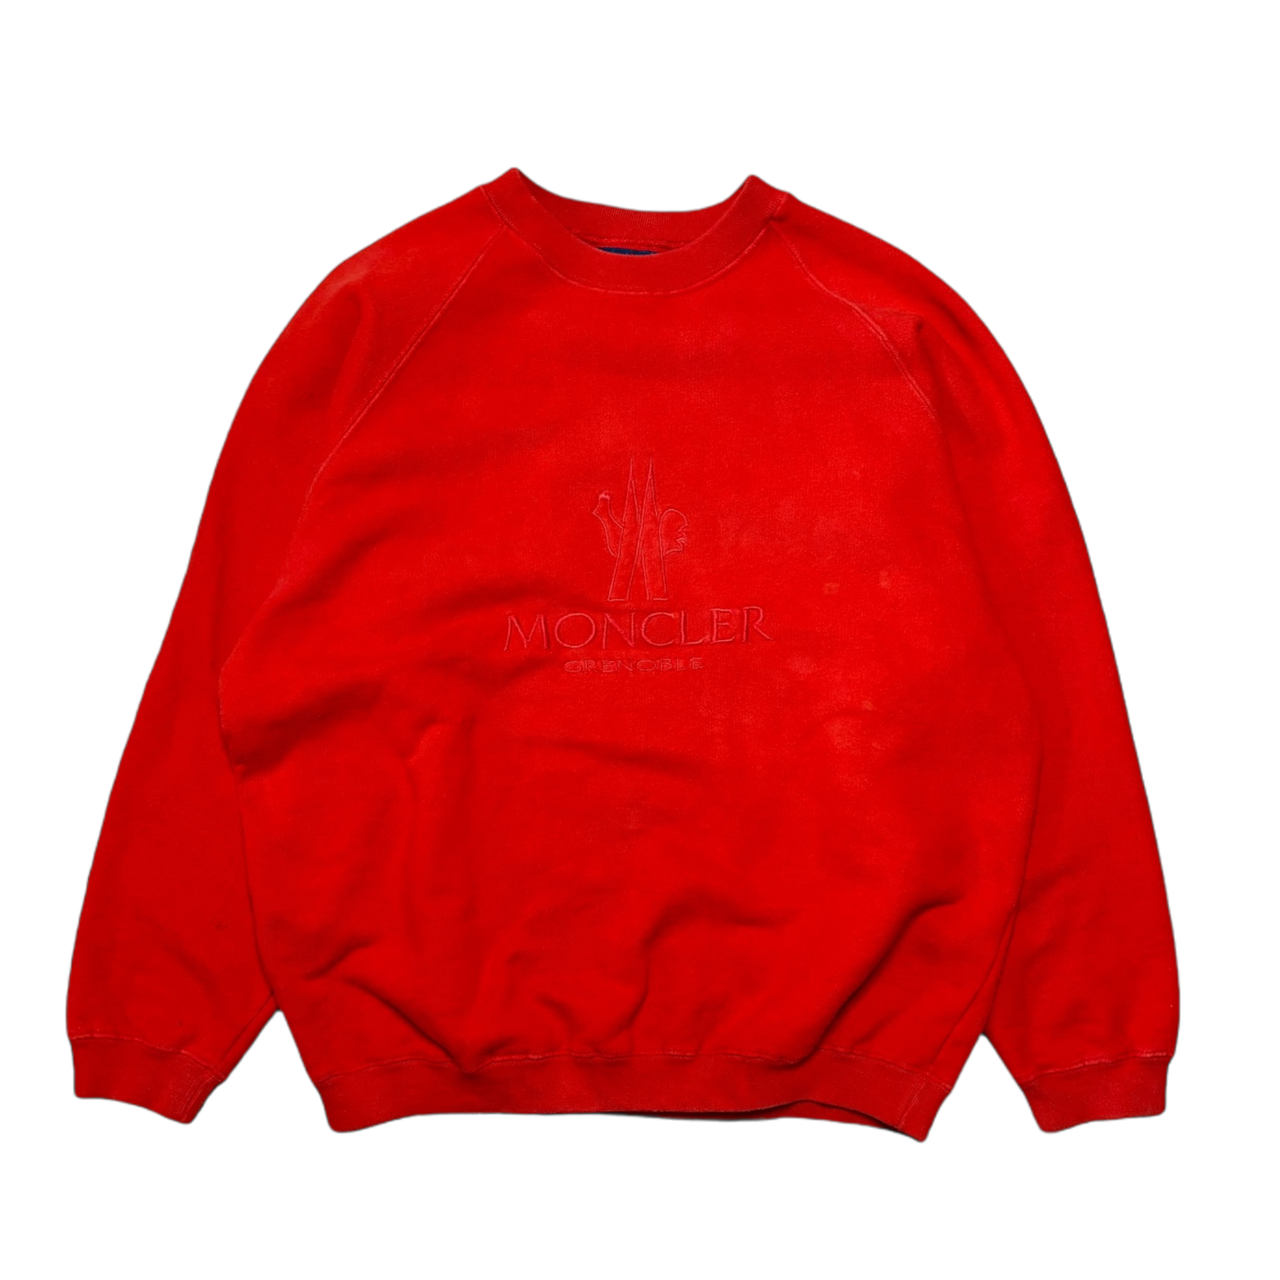 Moncler, Red Sweatshirt (Youth XL)